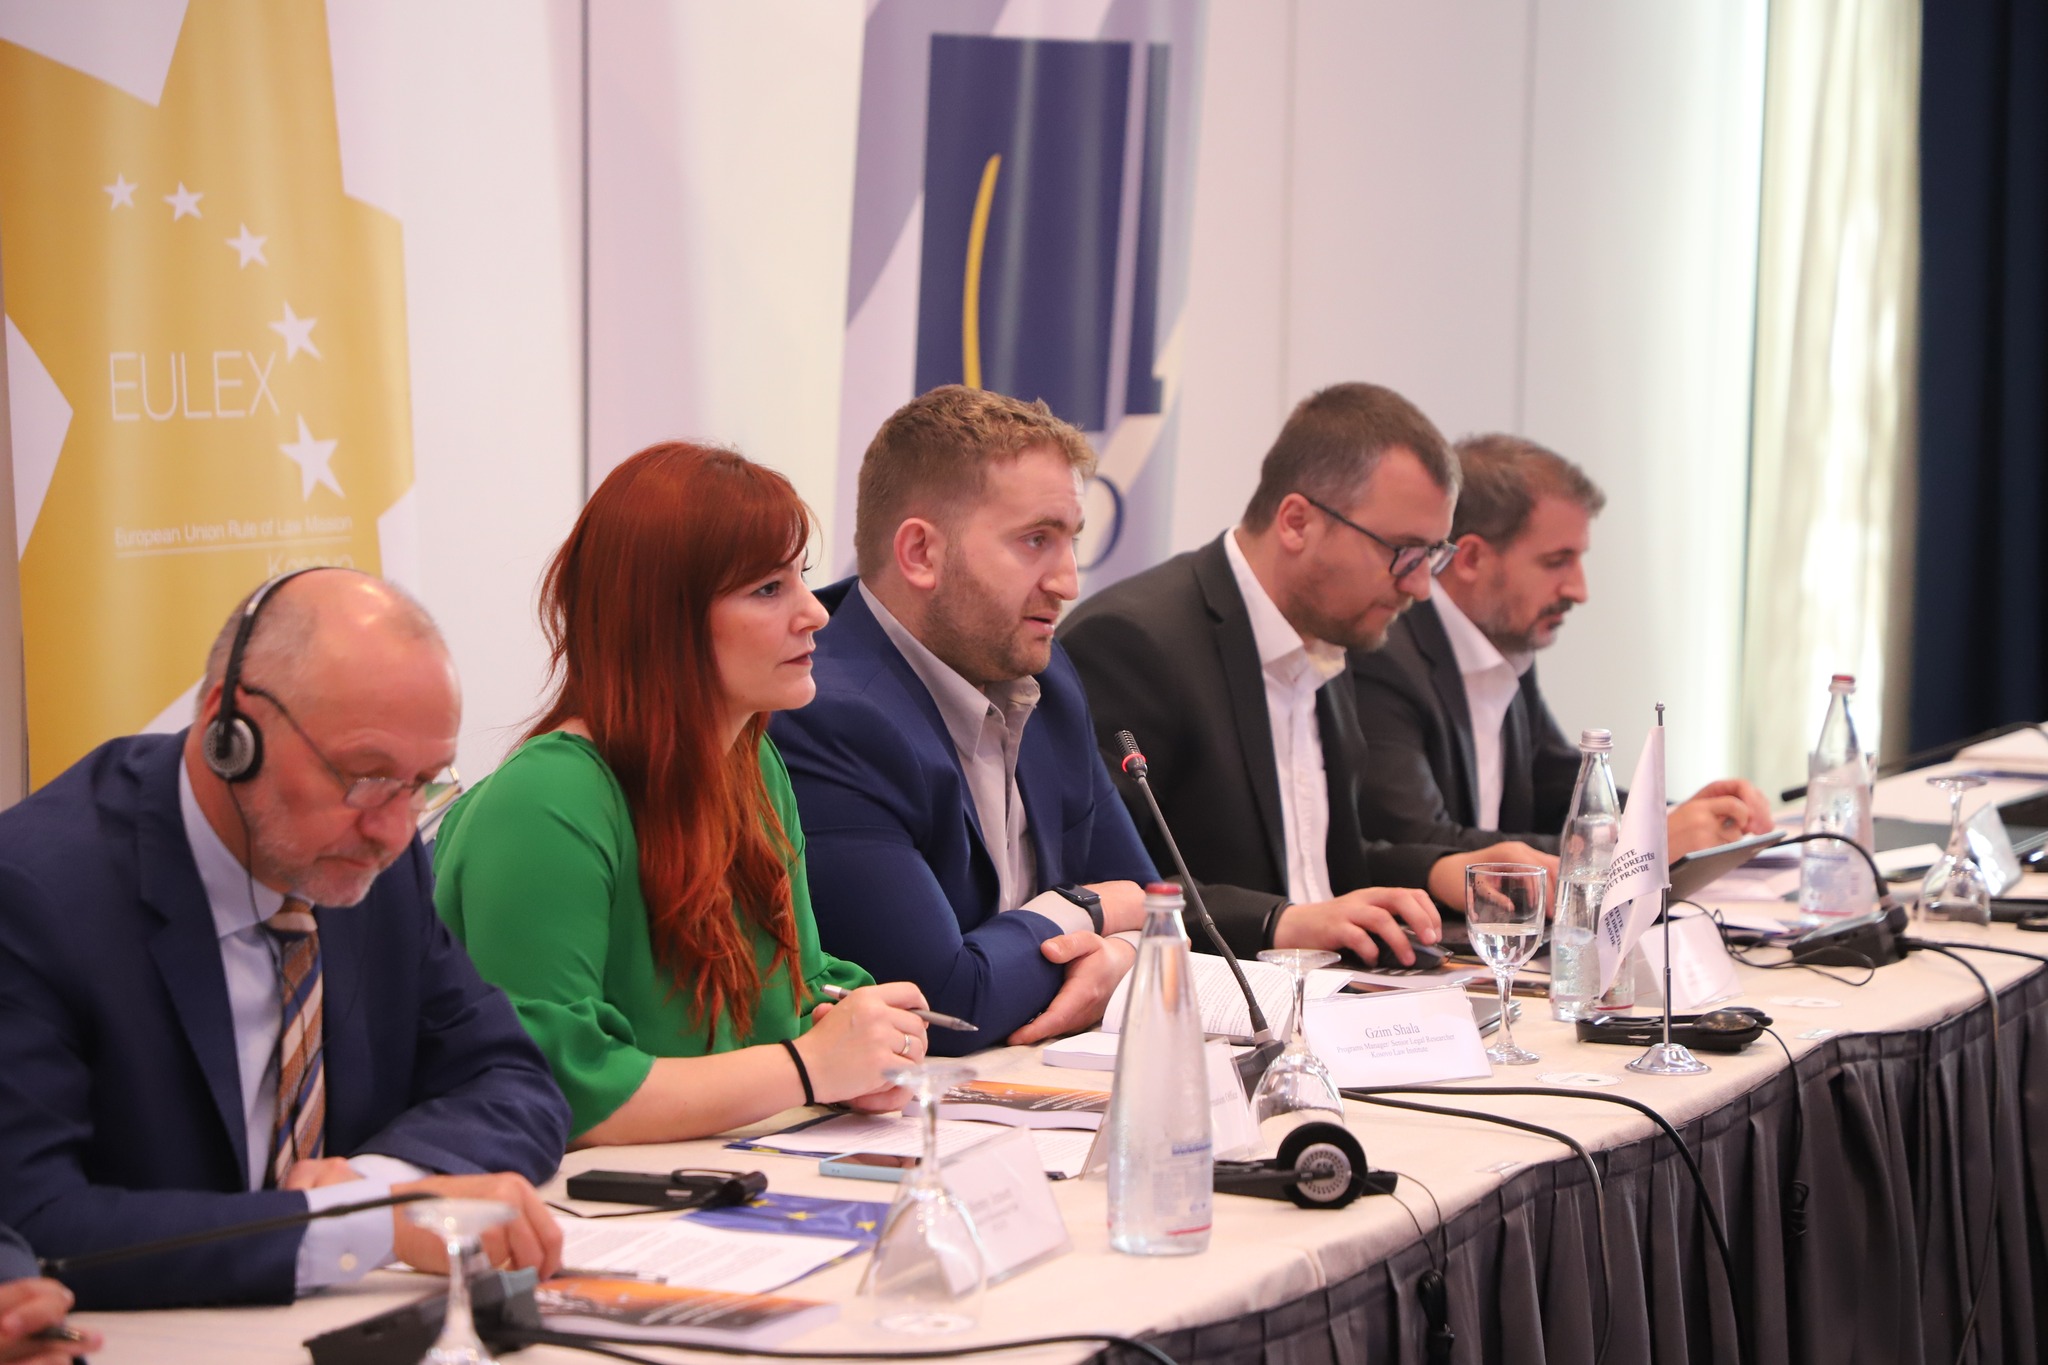 EULEX and the Kosovo Law Institute present the Third Report on Monitoring Court Hearings by Citizens